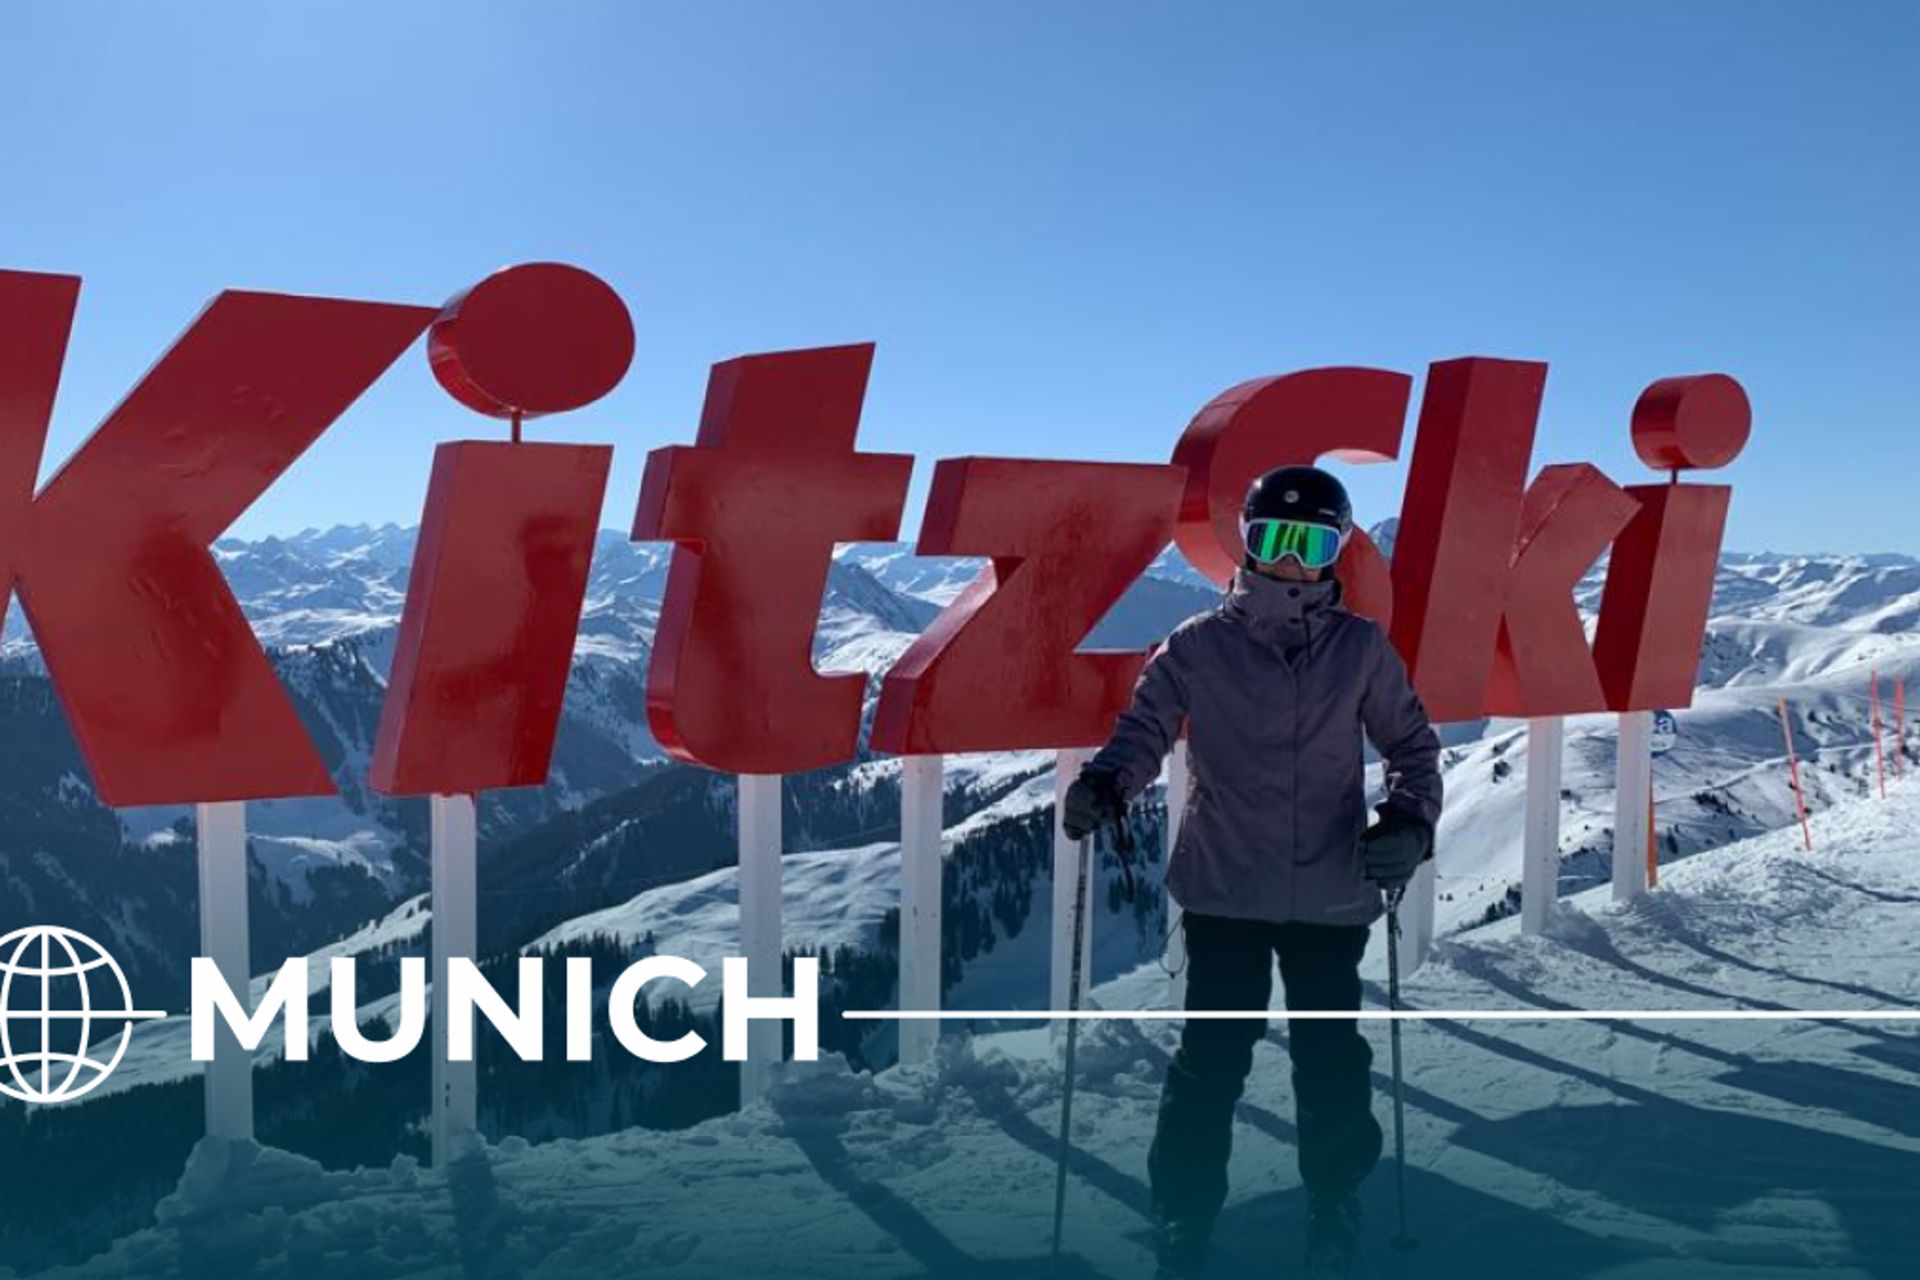 Trip to the Kitzbühel Alps: Darcy is back on skis for the first time in 25 years. The KitzSki ski area is located in Austria between Kitzbüheler Horn and Hahnenkamm at an altitude of between 800 and 2,000 meters and is about 125 kilometers from Munich.